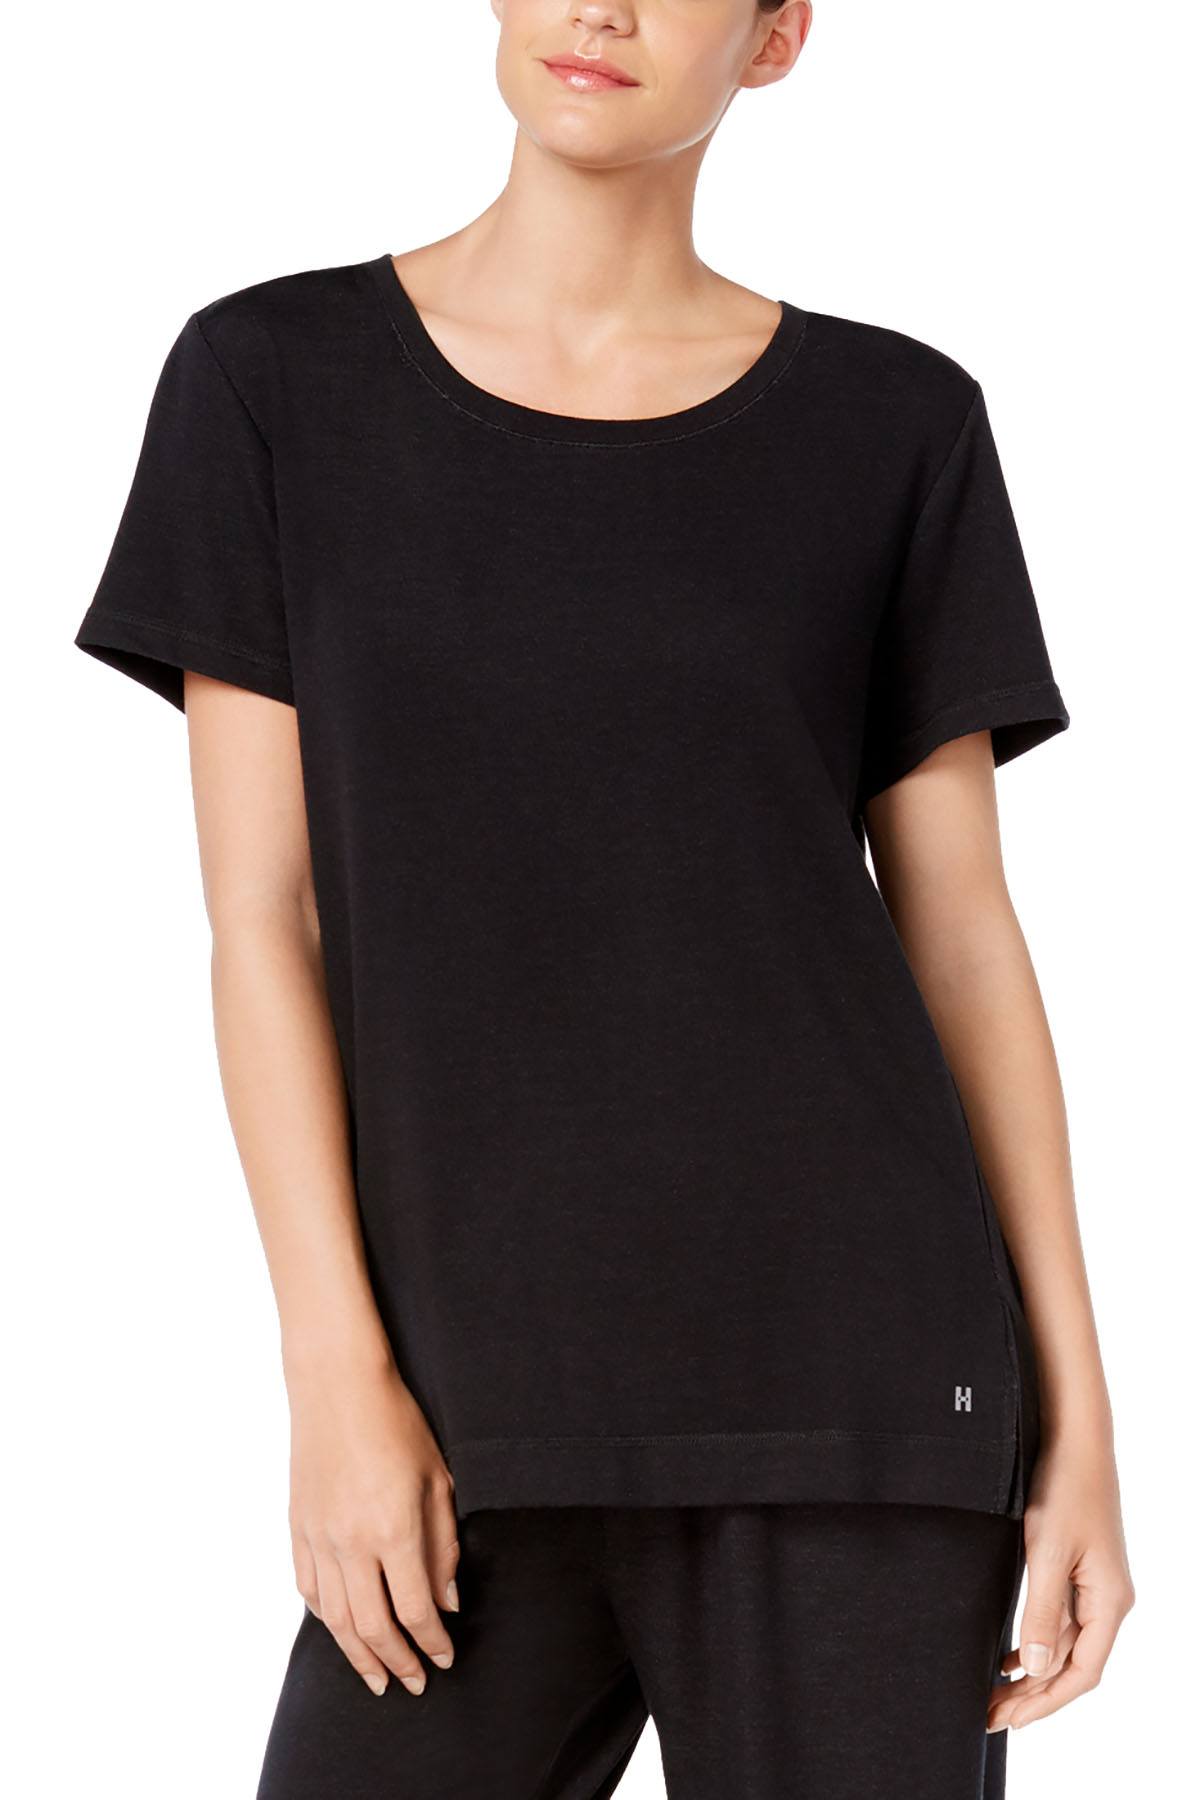 HUE Solid-Black Super Soft Terry Lounge Tee